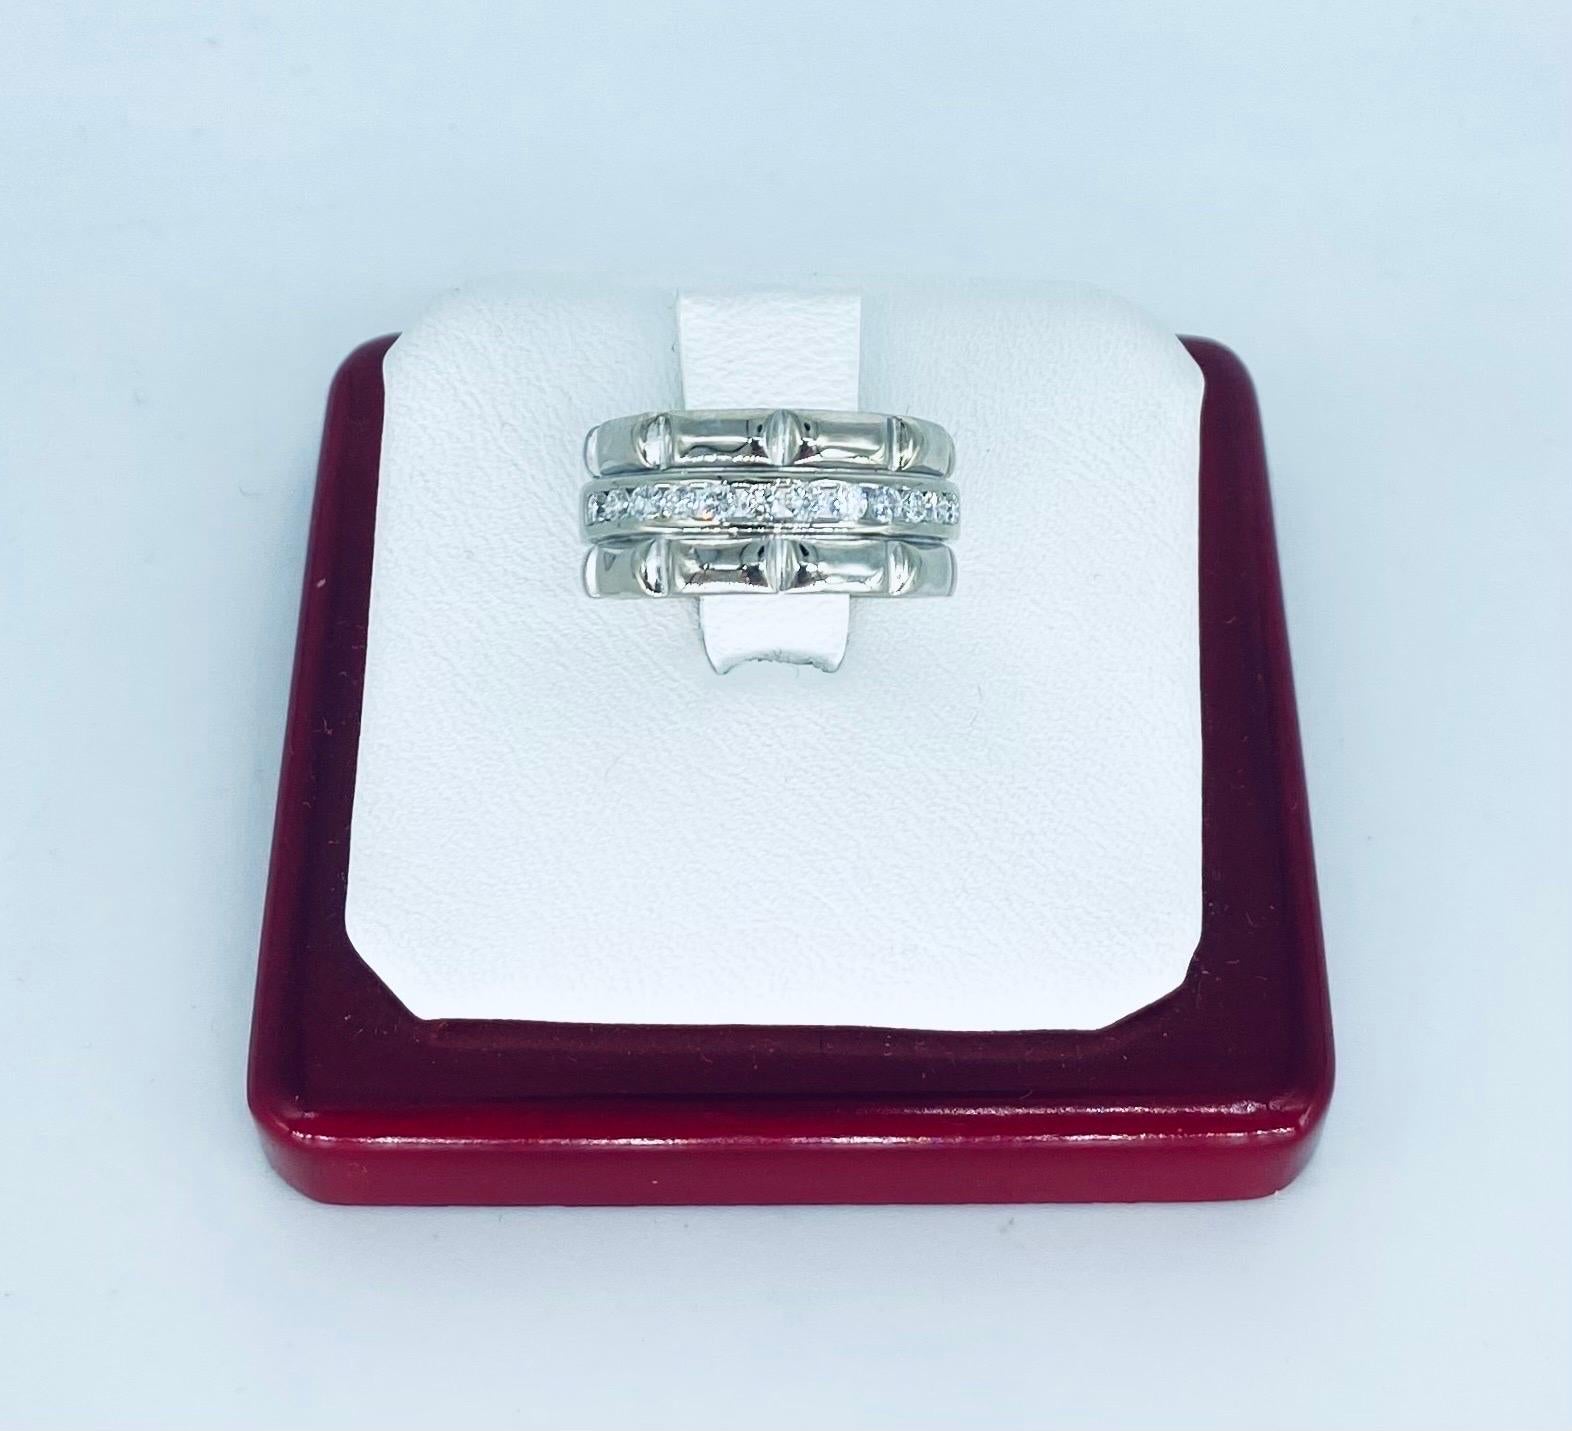 Vintage 9.3mm 0.36 Carat Diamonds Channel Set Bamboo Design 18k White Gold Ring. The ring is 9.3mm wide and is a size 5.25
The ring features very clean and white round diamonds with a bamboo theme. Made in 18k white gold, this ring weights 9.5 grams.